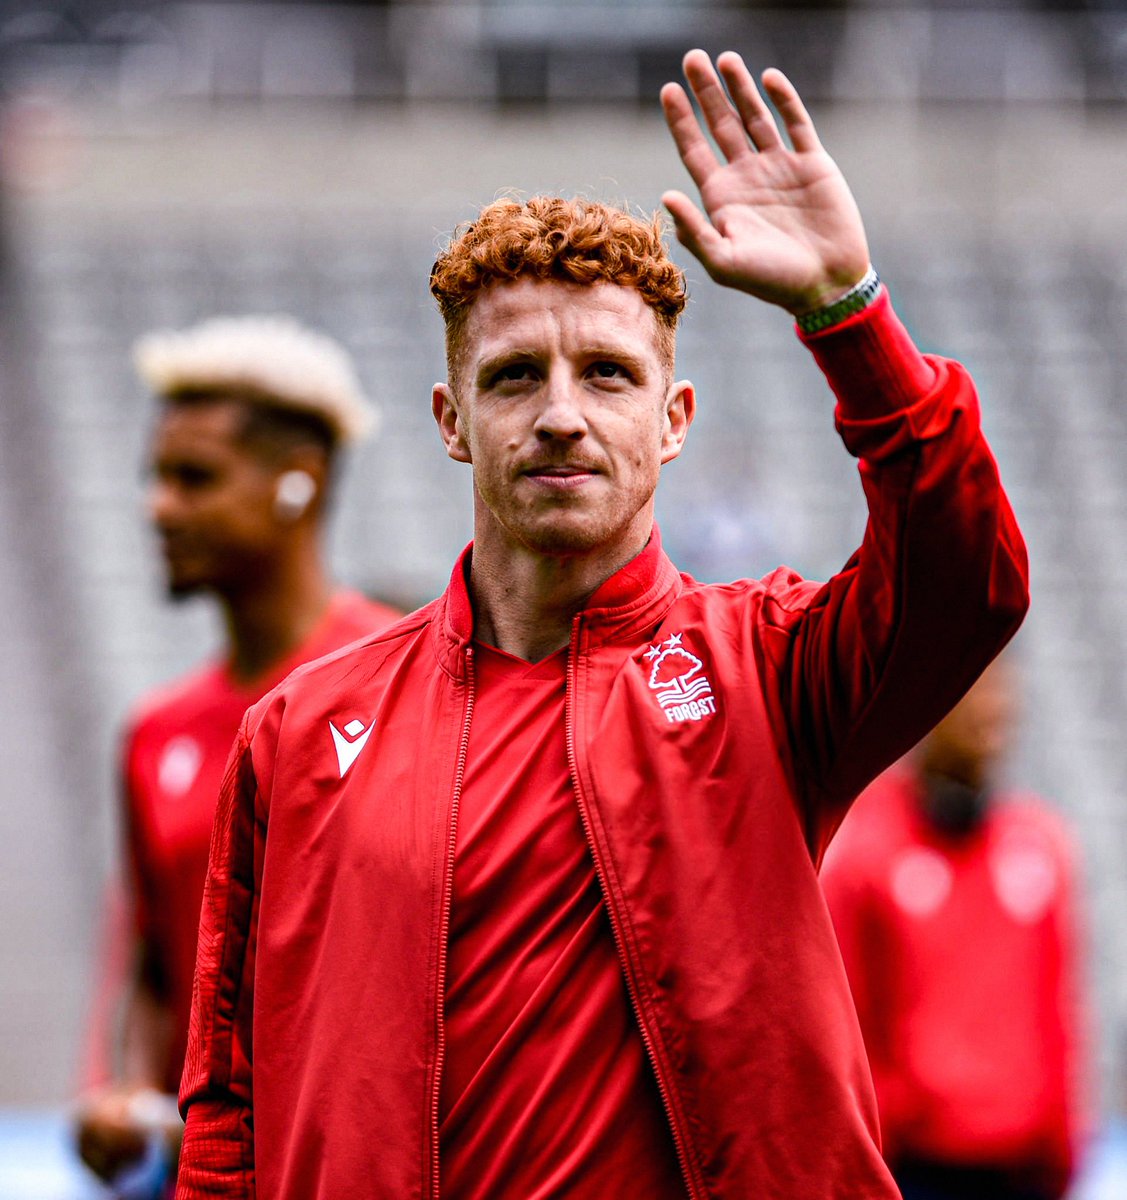 🔴 𝗢𝗙𝗙𝗜𝗖𝗜𝗔𝗟! Nottingham Forest confirm the departures of Cafú, Lyle Taylor and Jack Colback.

All the best guys ❤️ #NFFC